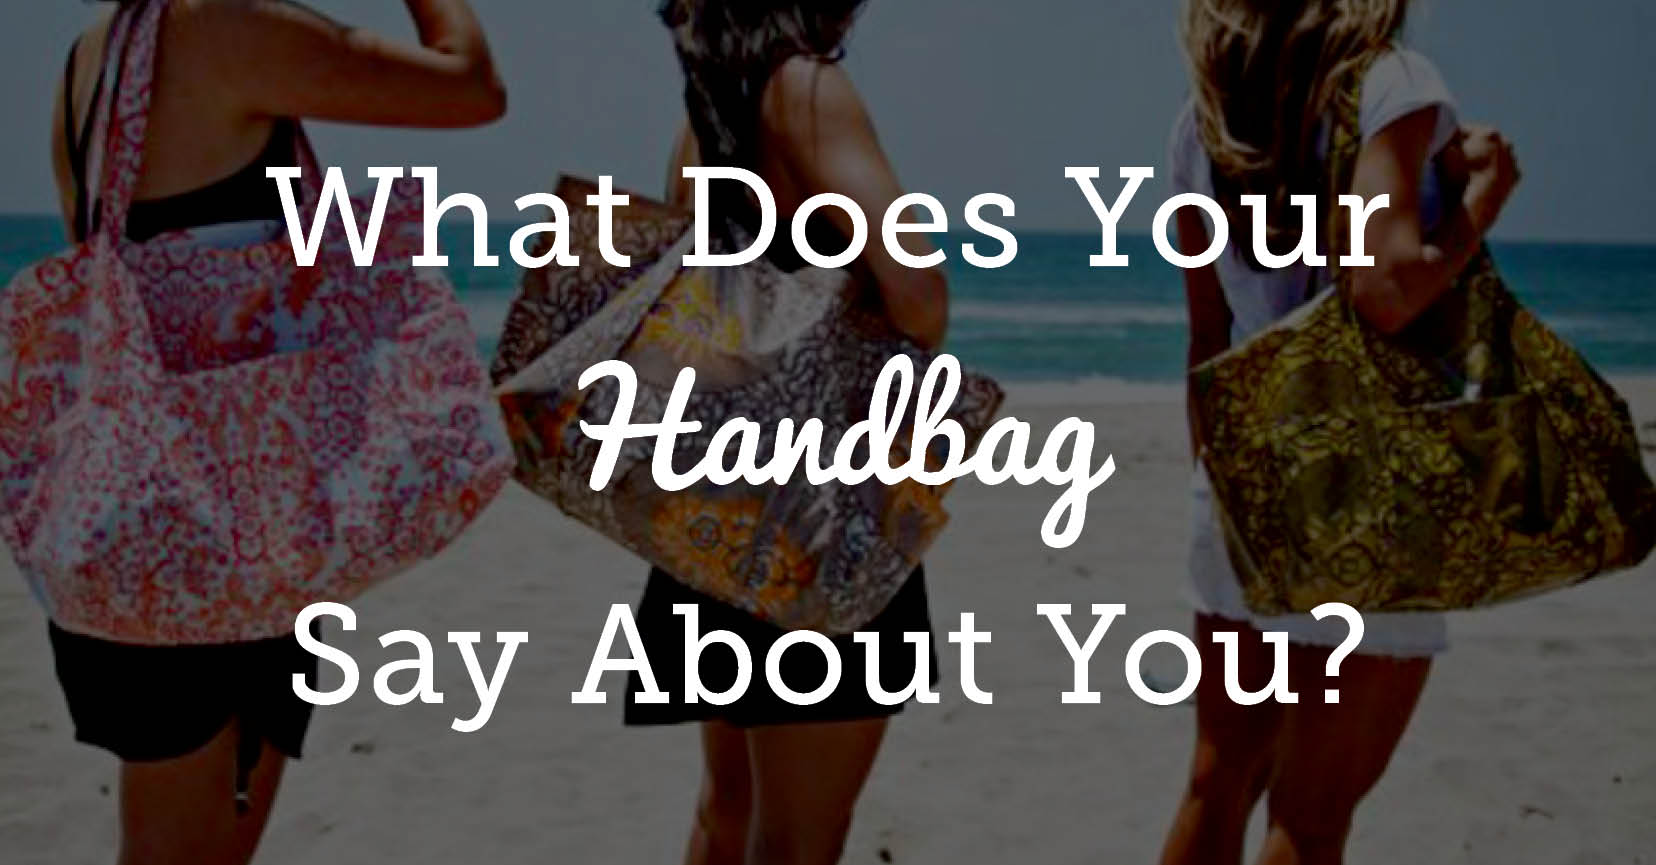 What does your handbag say about you